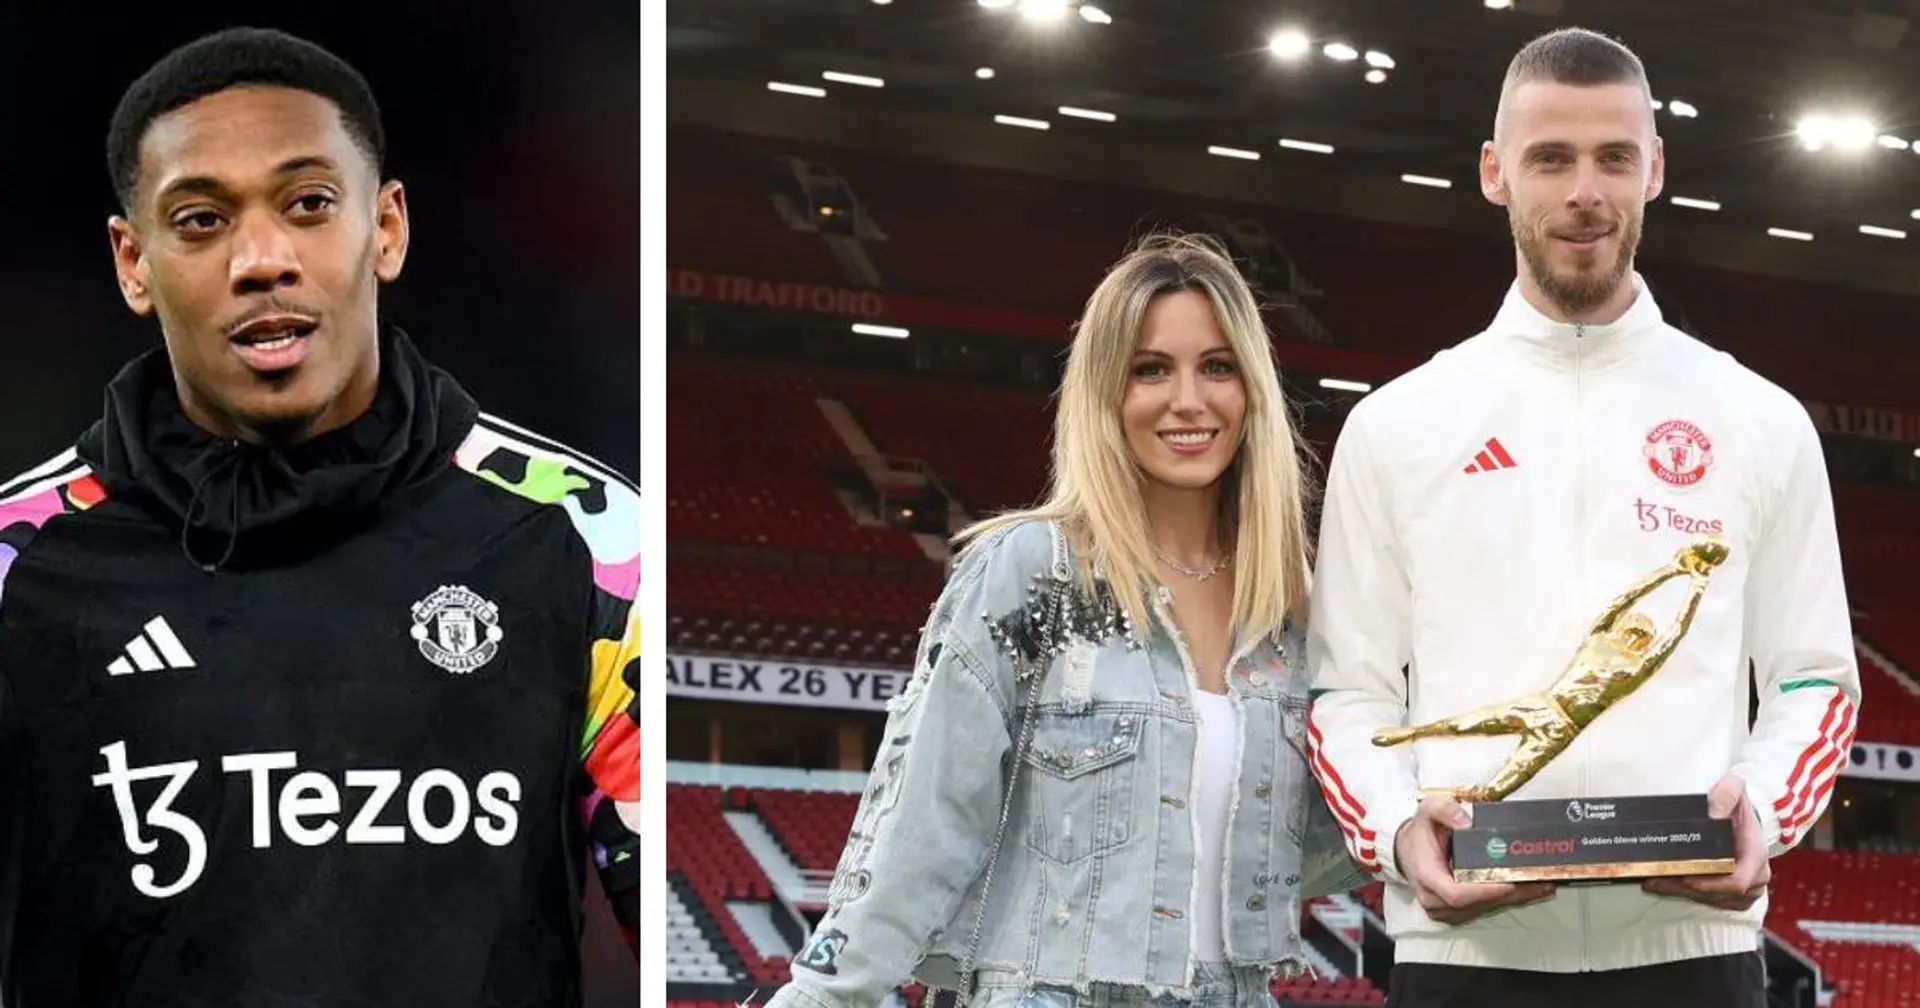 Fan claims Martial is a bigger Man United legend than De Gea, says Spaniard cost the club 6 trophies